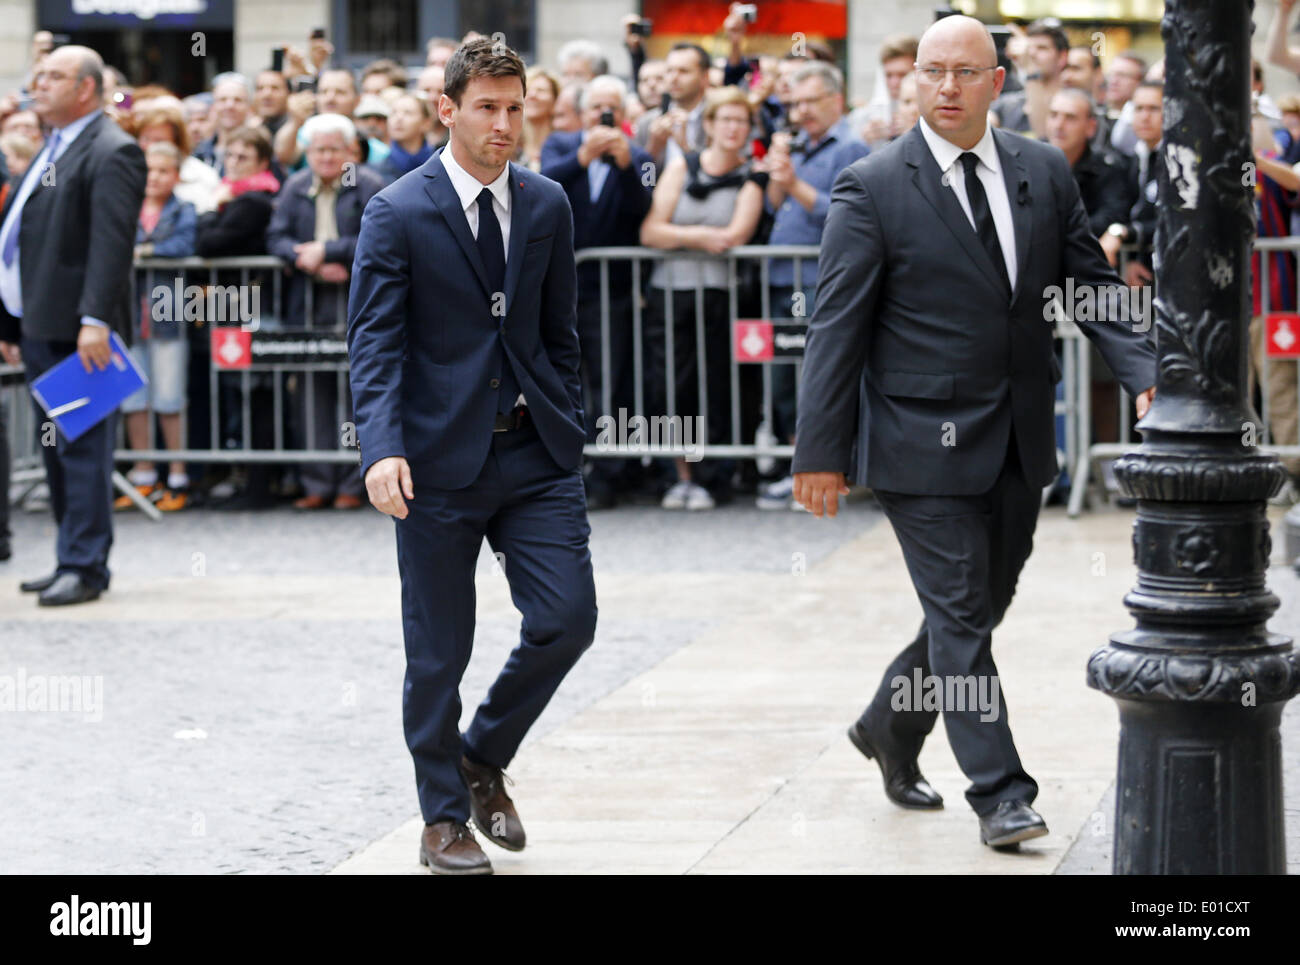 Barcelona, Spain. 28th Apr, 2014. Leo Messi entering in the cathedral of Barcelona to attend the funeral of Tito Vilanova. Photo: Joan Valls/Urbanandsport/Nurphoto. Credit:  Joan Valls/NurPhoto/ZUMAPRESS.com/Alamy Live News Stock Photo